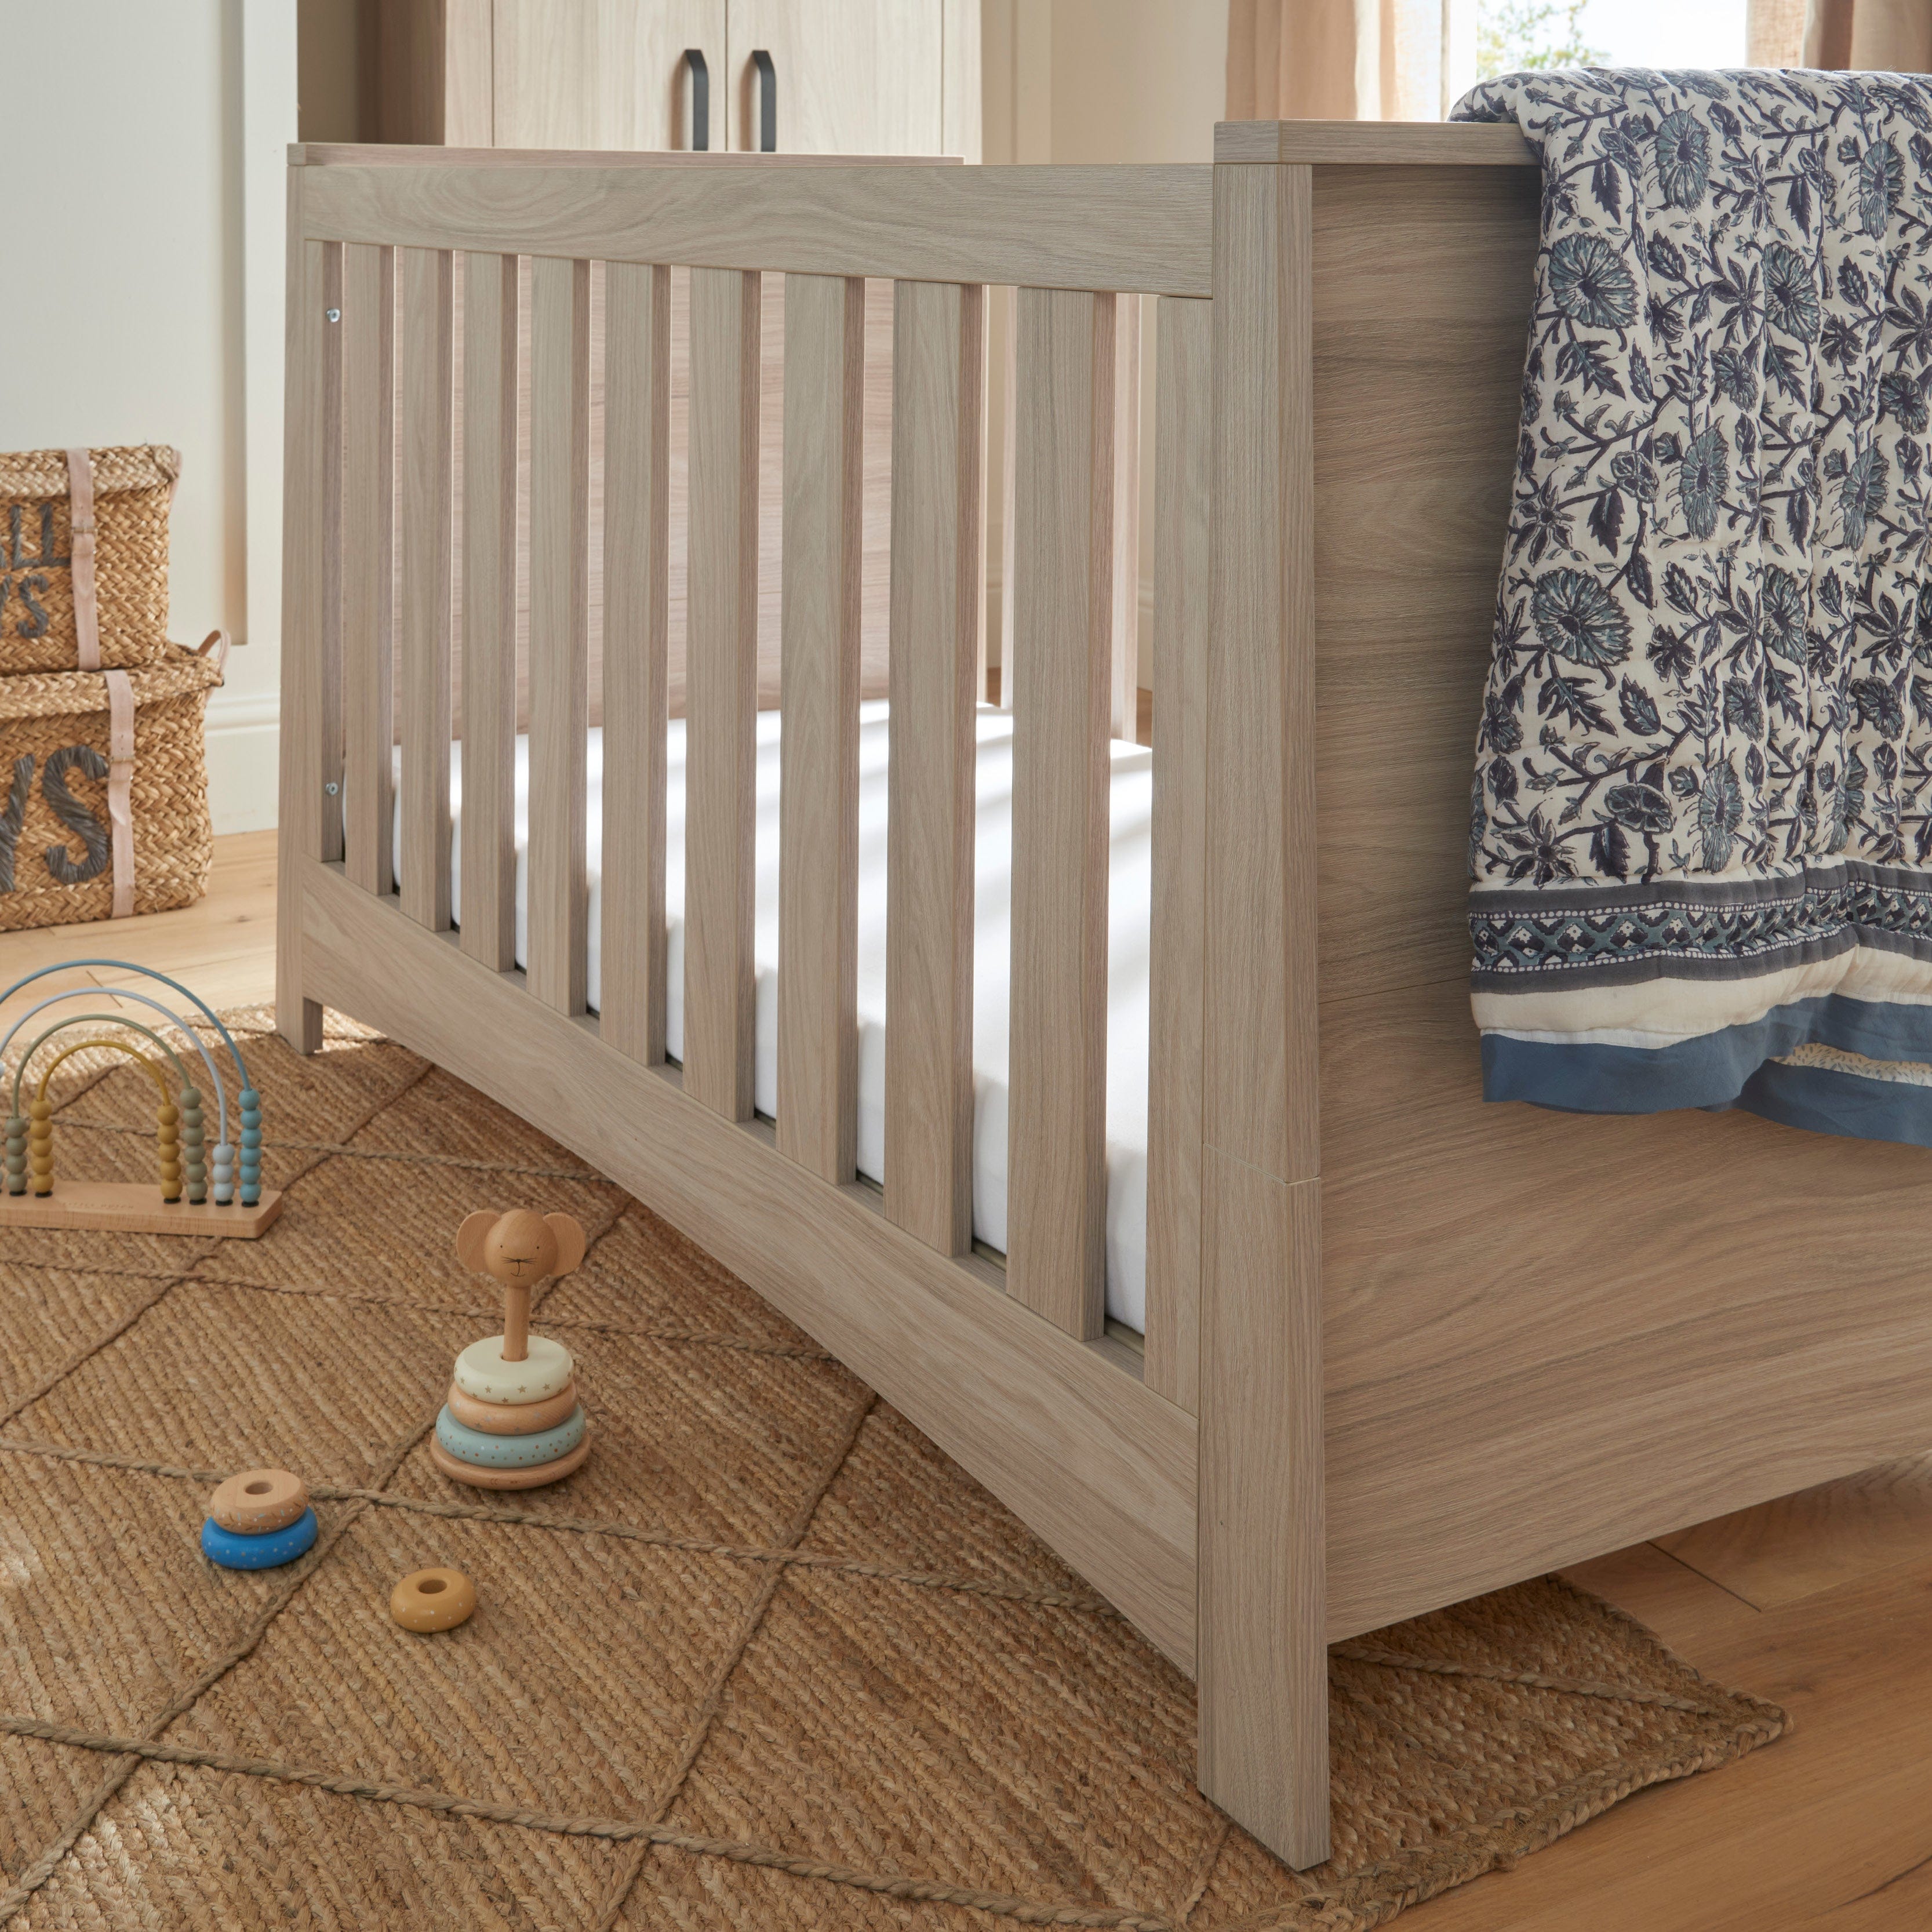 CuddleCo Isla Cotbed in Ash Cot Beds